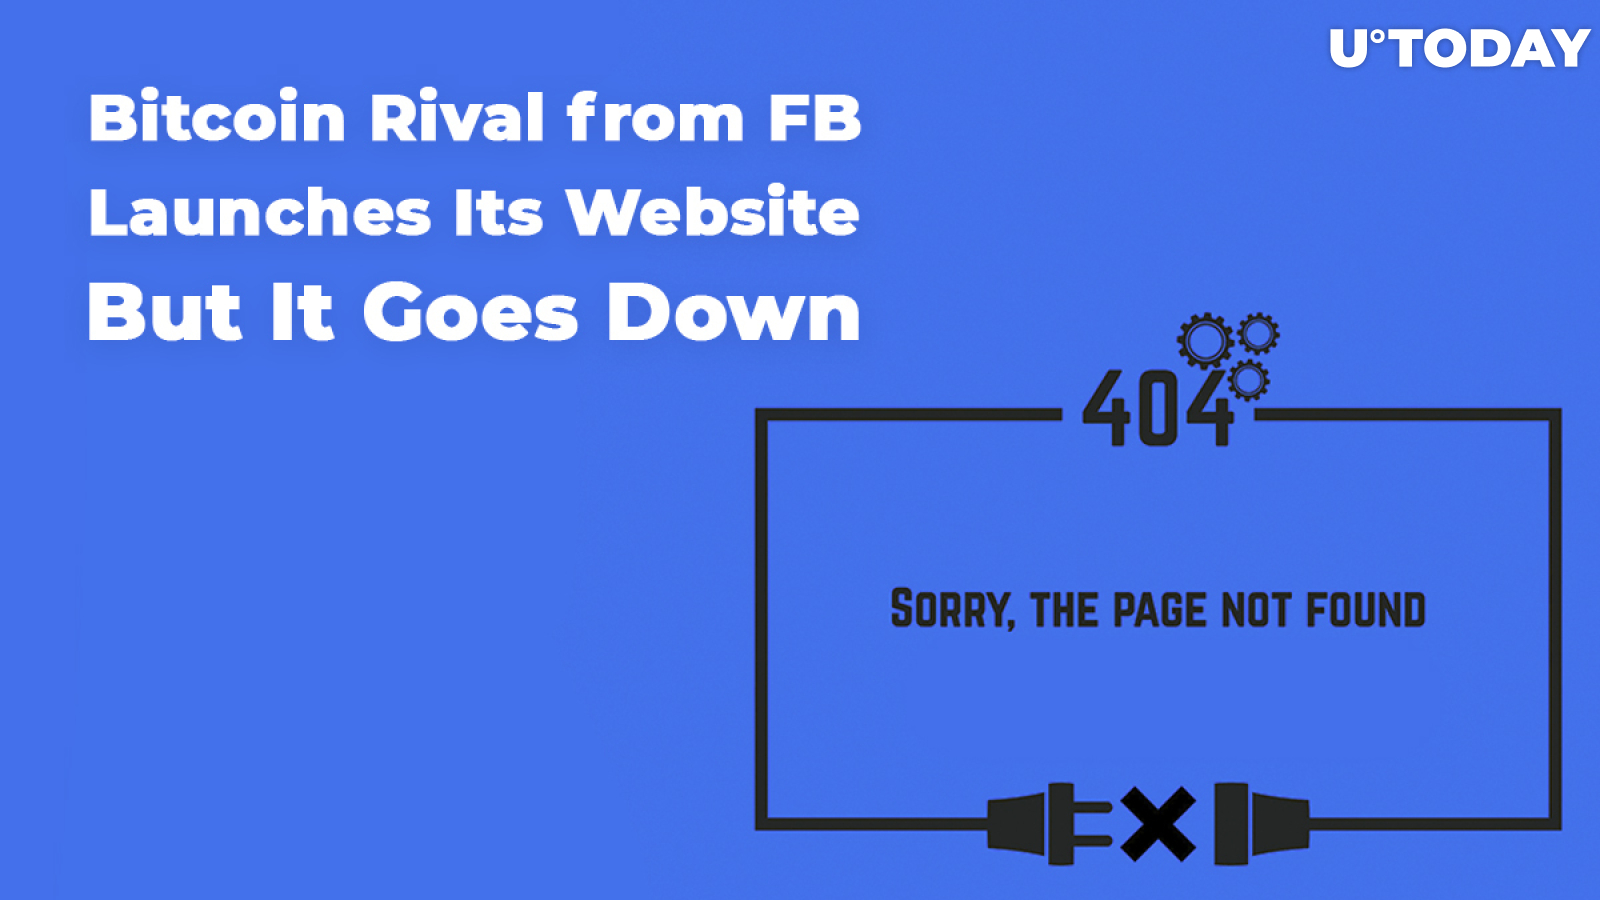 Breaking: Bitcoin Rival from FB, GlobalCoin, Launches Its Website But It Goes Down: Error 404